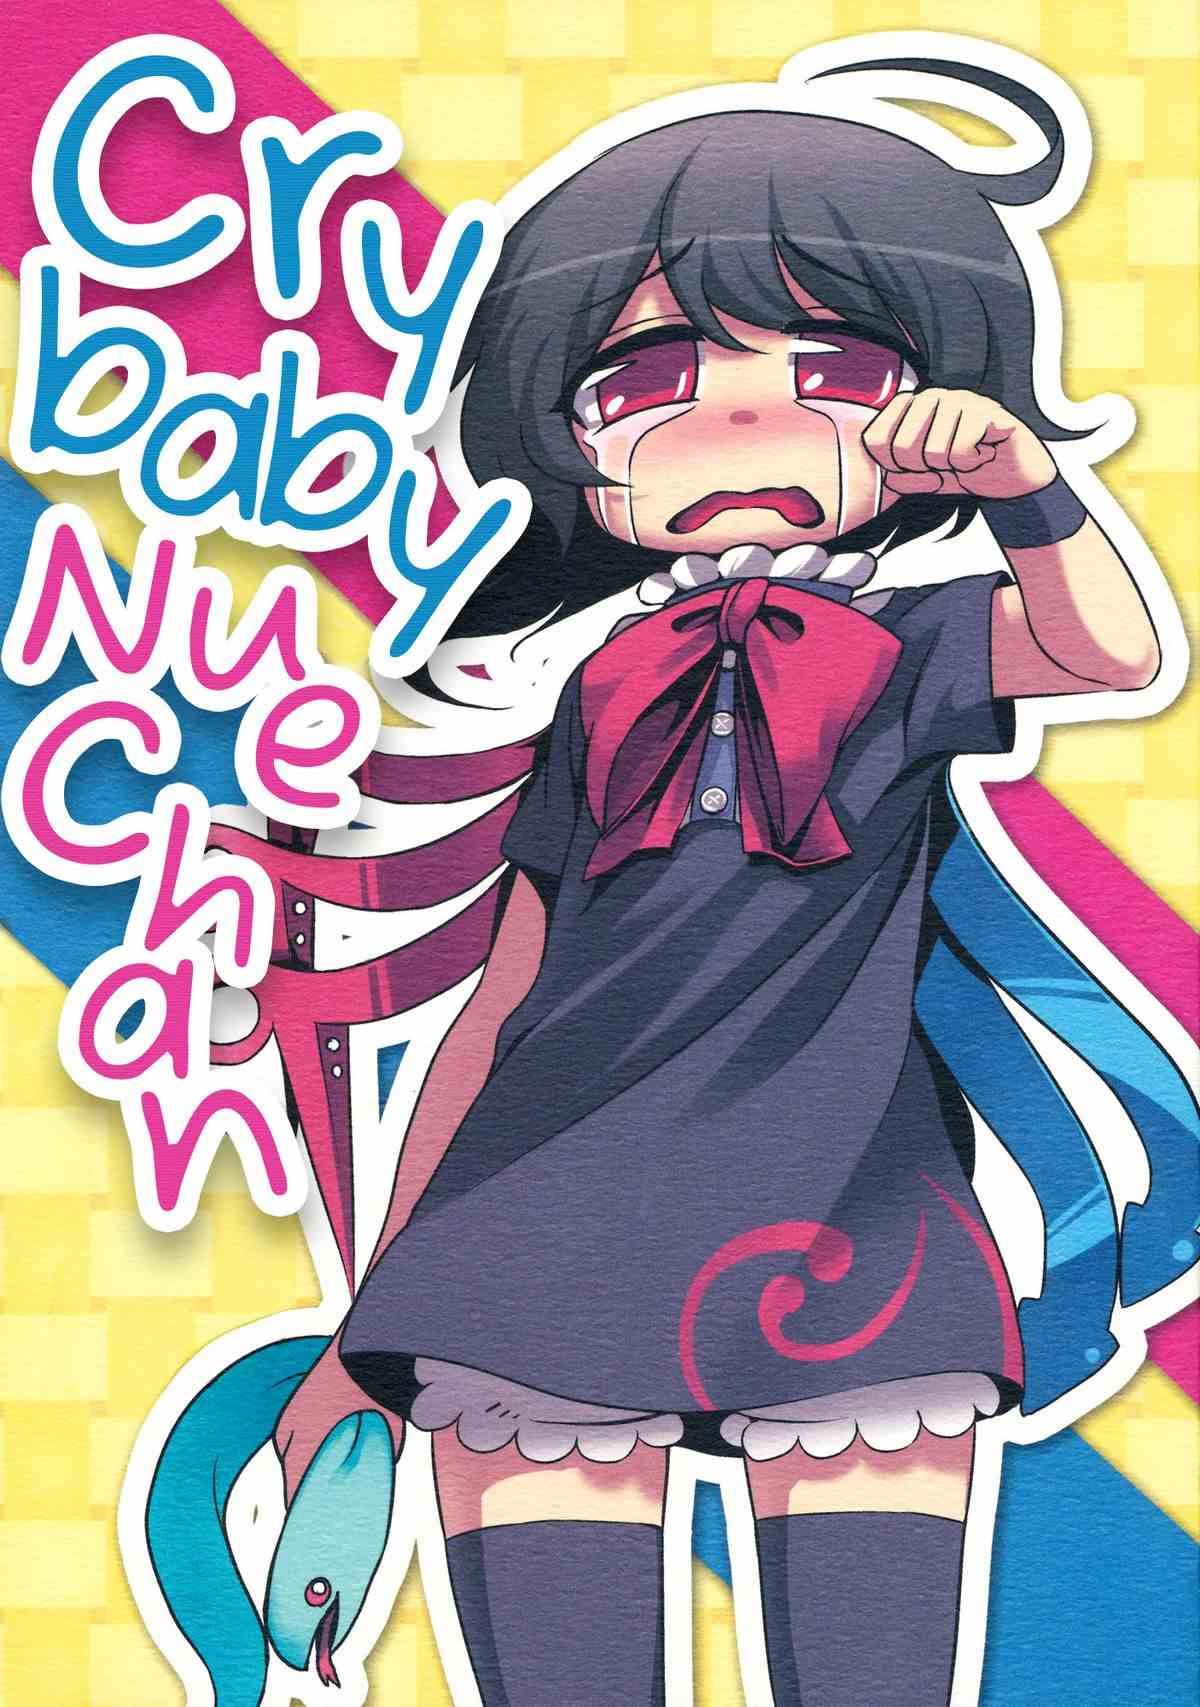 Cry baby Nue chan - 第1话 - 1